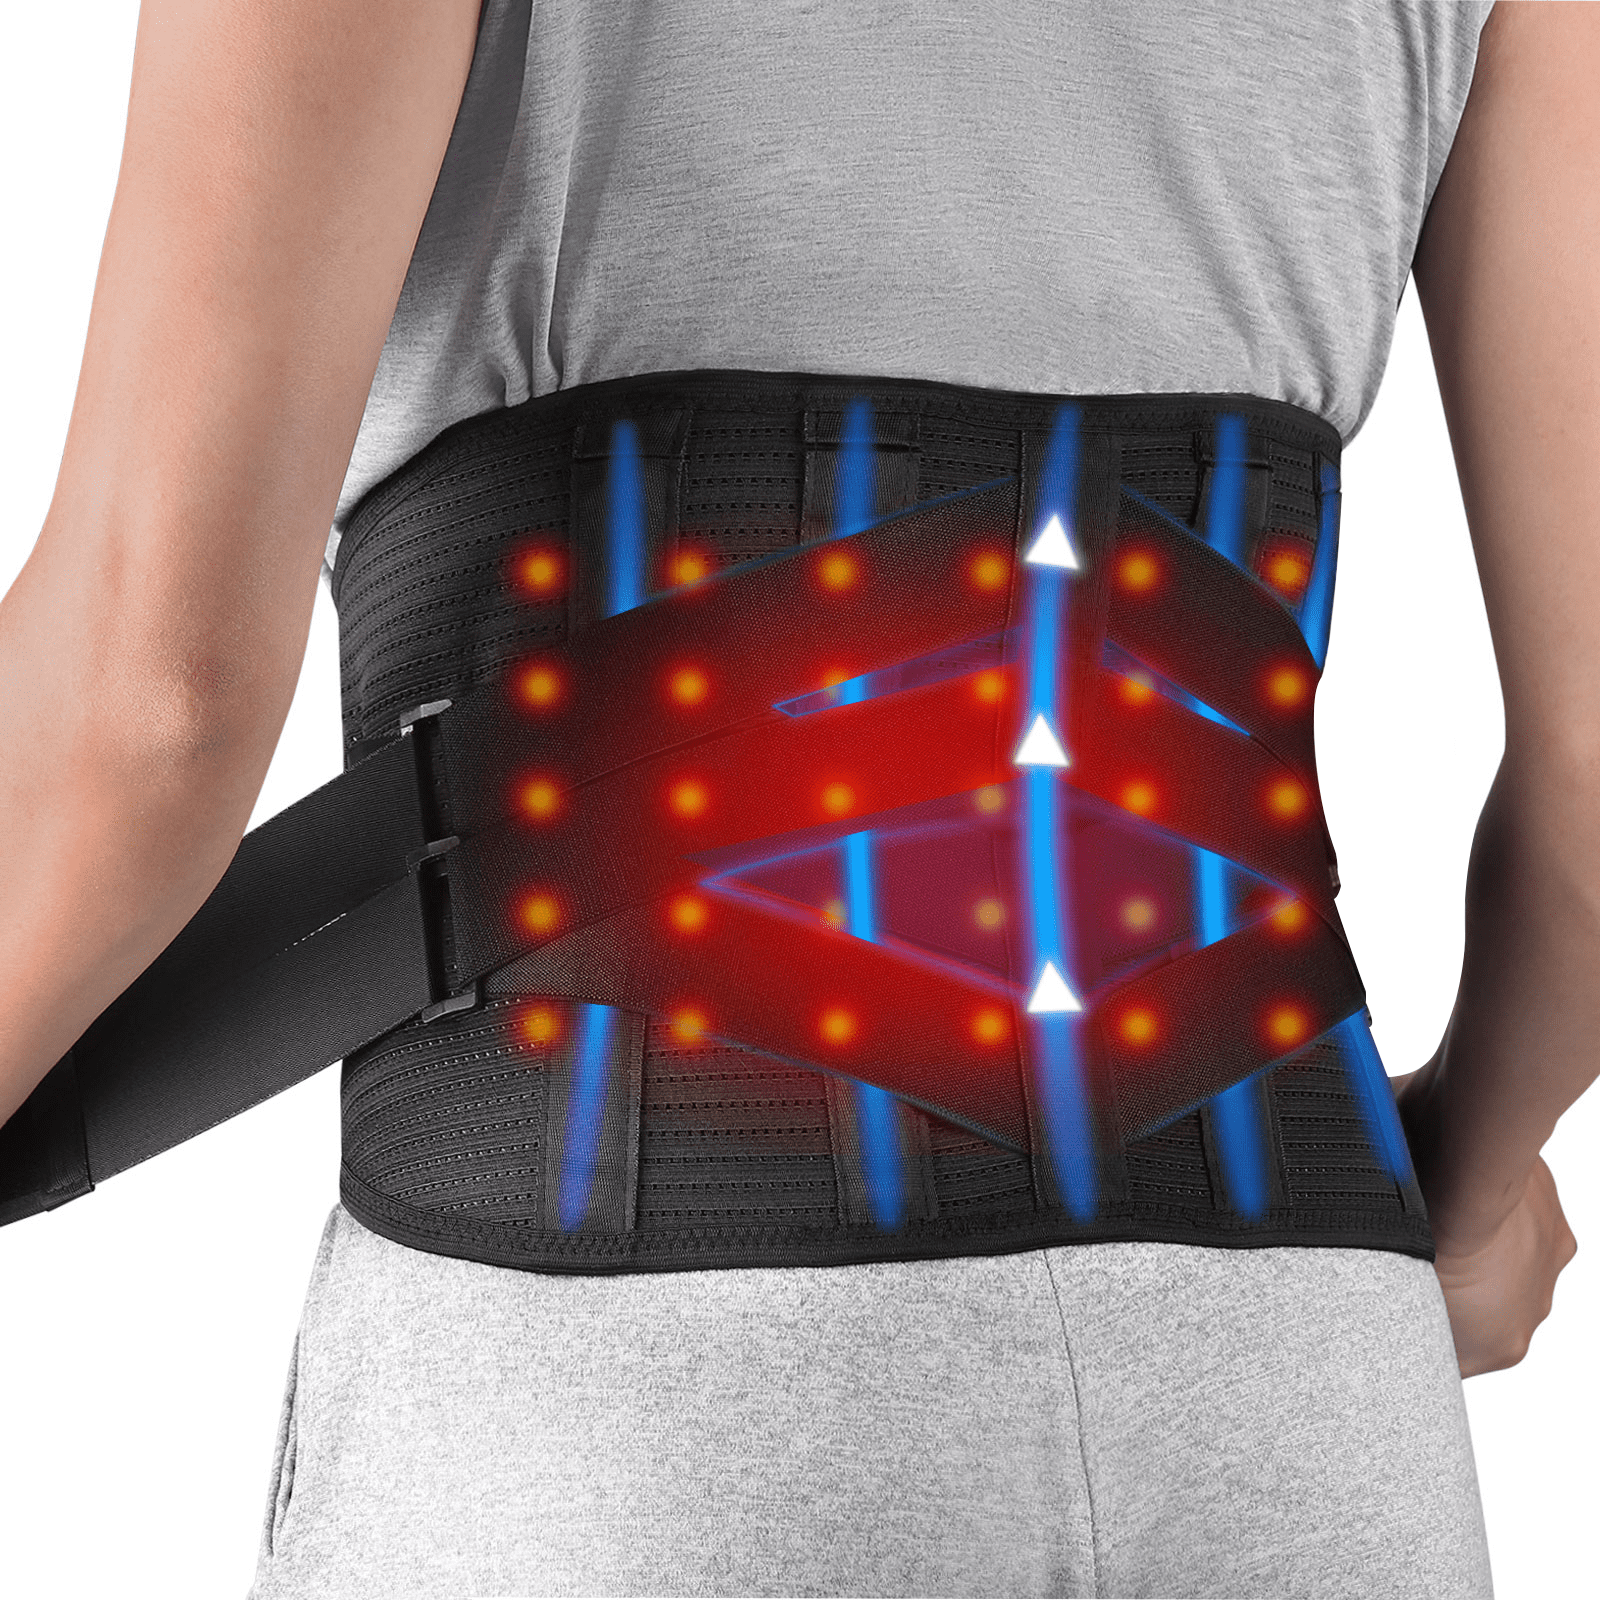 NeoHealth Lower Back Brace | Lumbar Support | Wrap for Recovery, Workout,  Herniated Disc Pain Relief | Waist Trimmer Weight Loss Ab Belt | Exercise